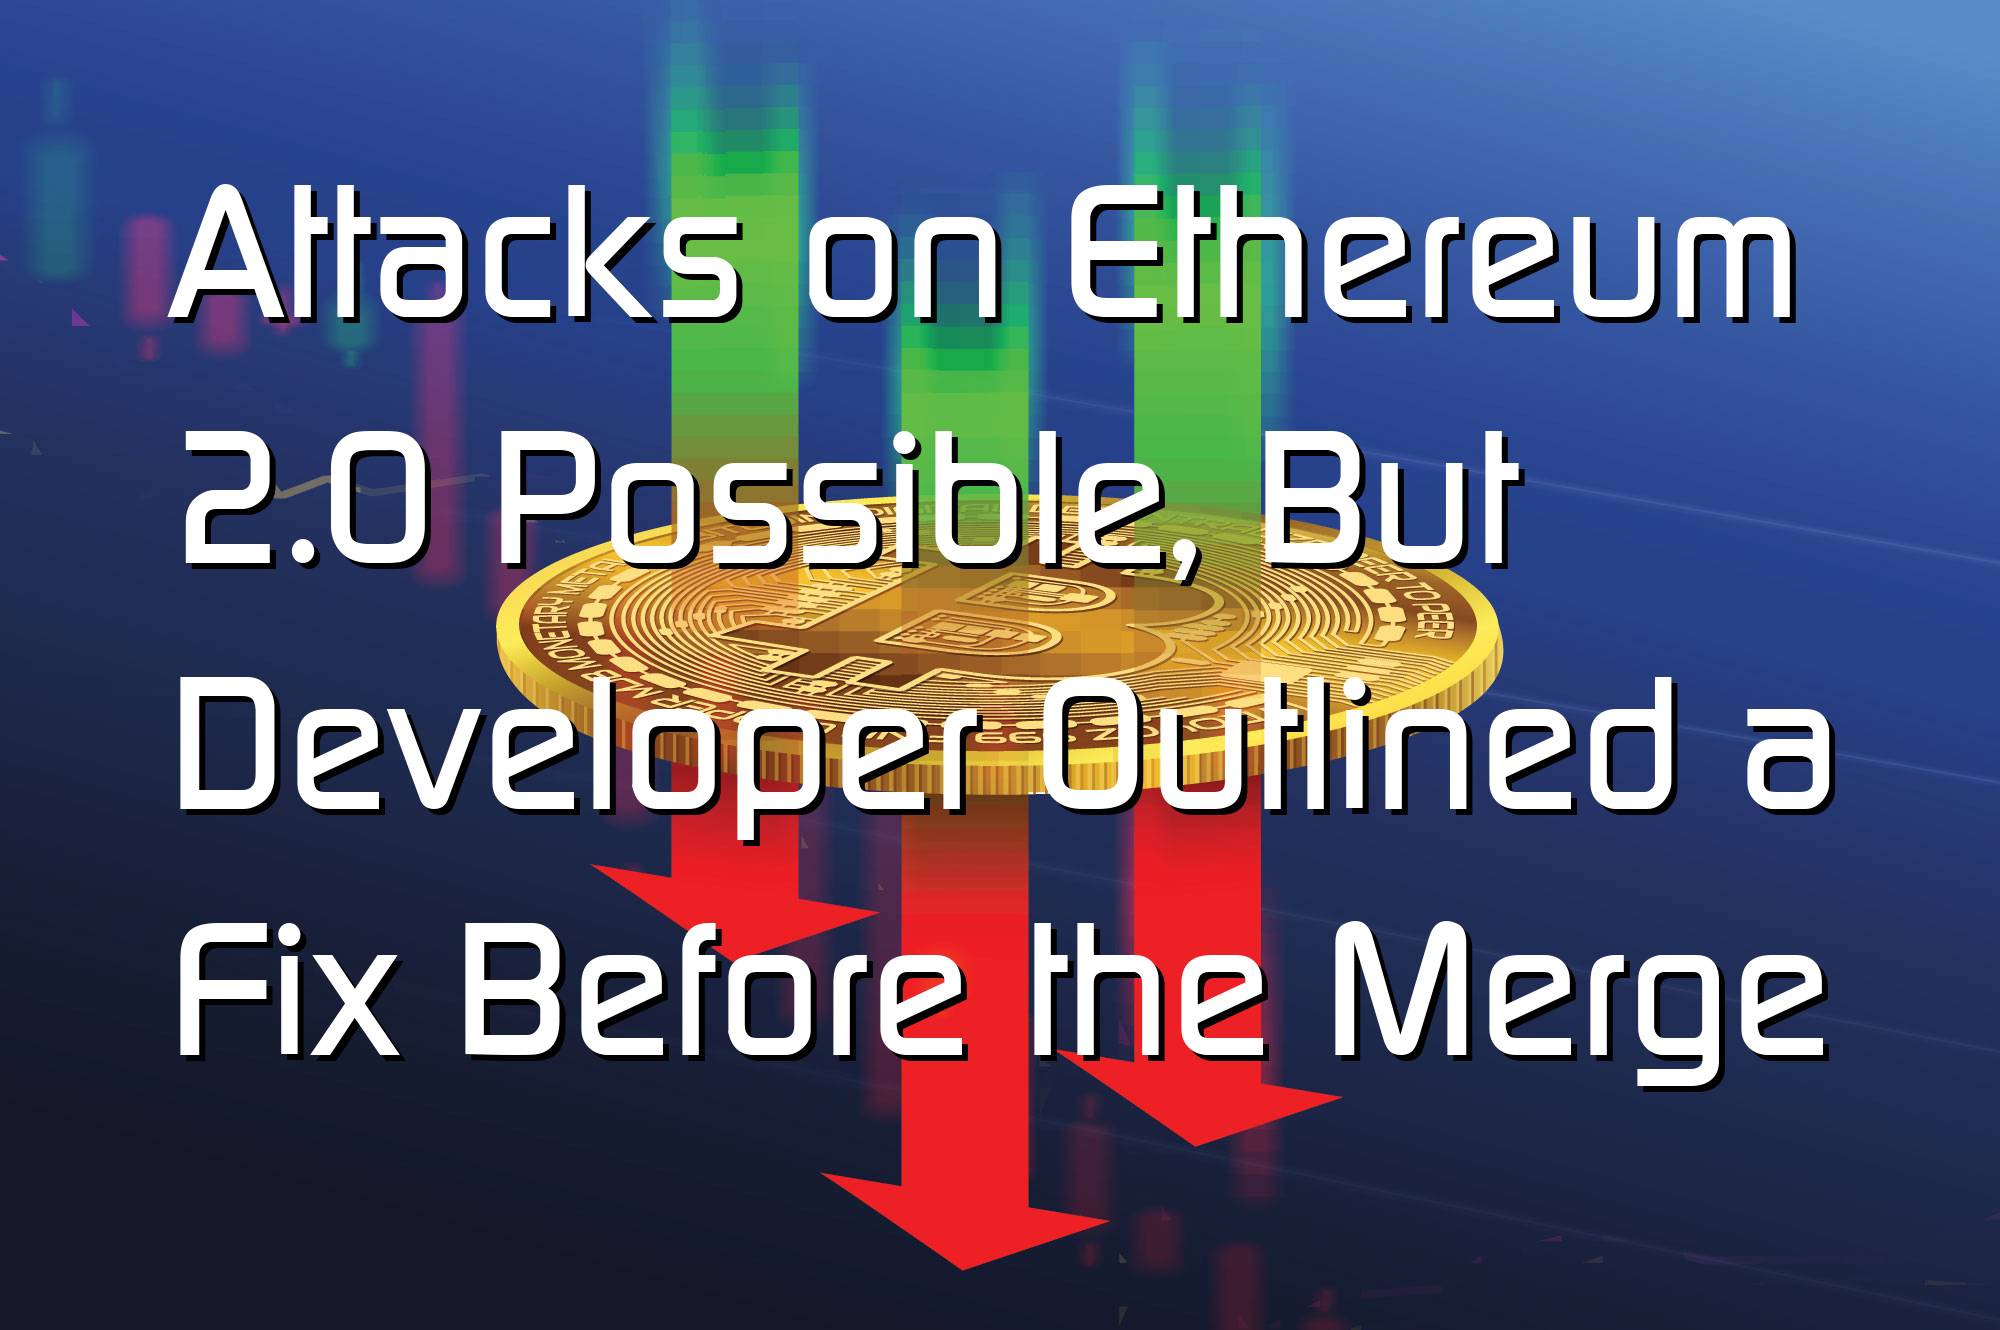 @$60907: Attacks on Ethereum 2.0 Possible, But Developer Outlined a Fix Before the Merge